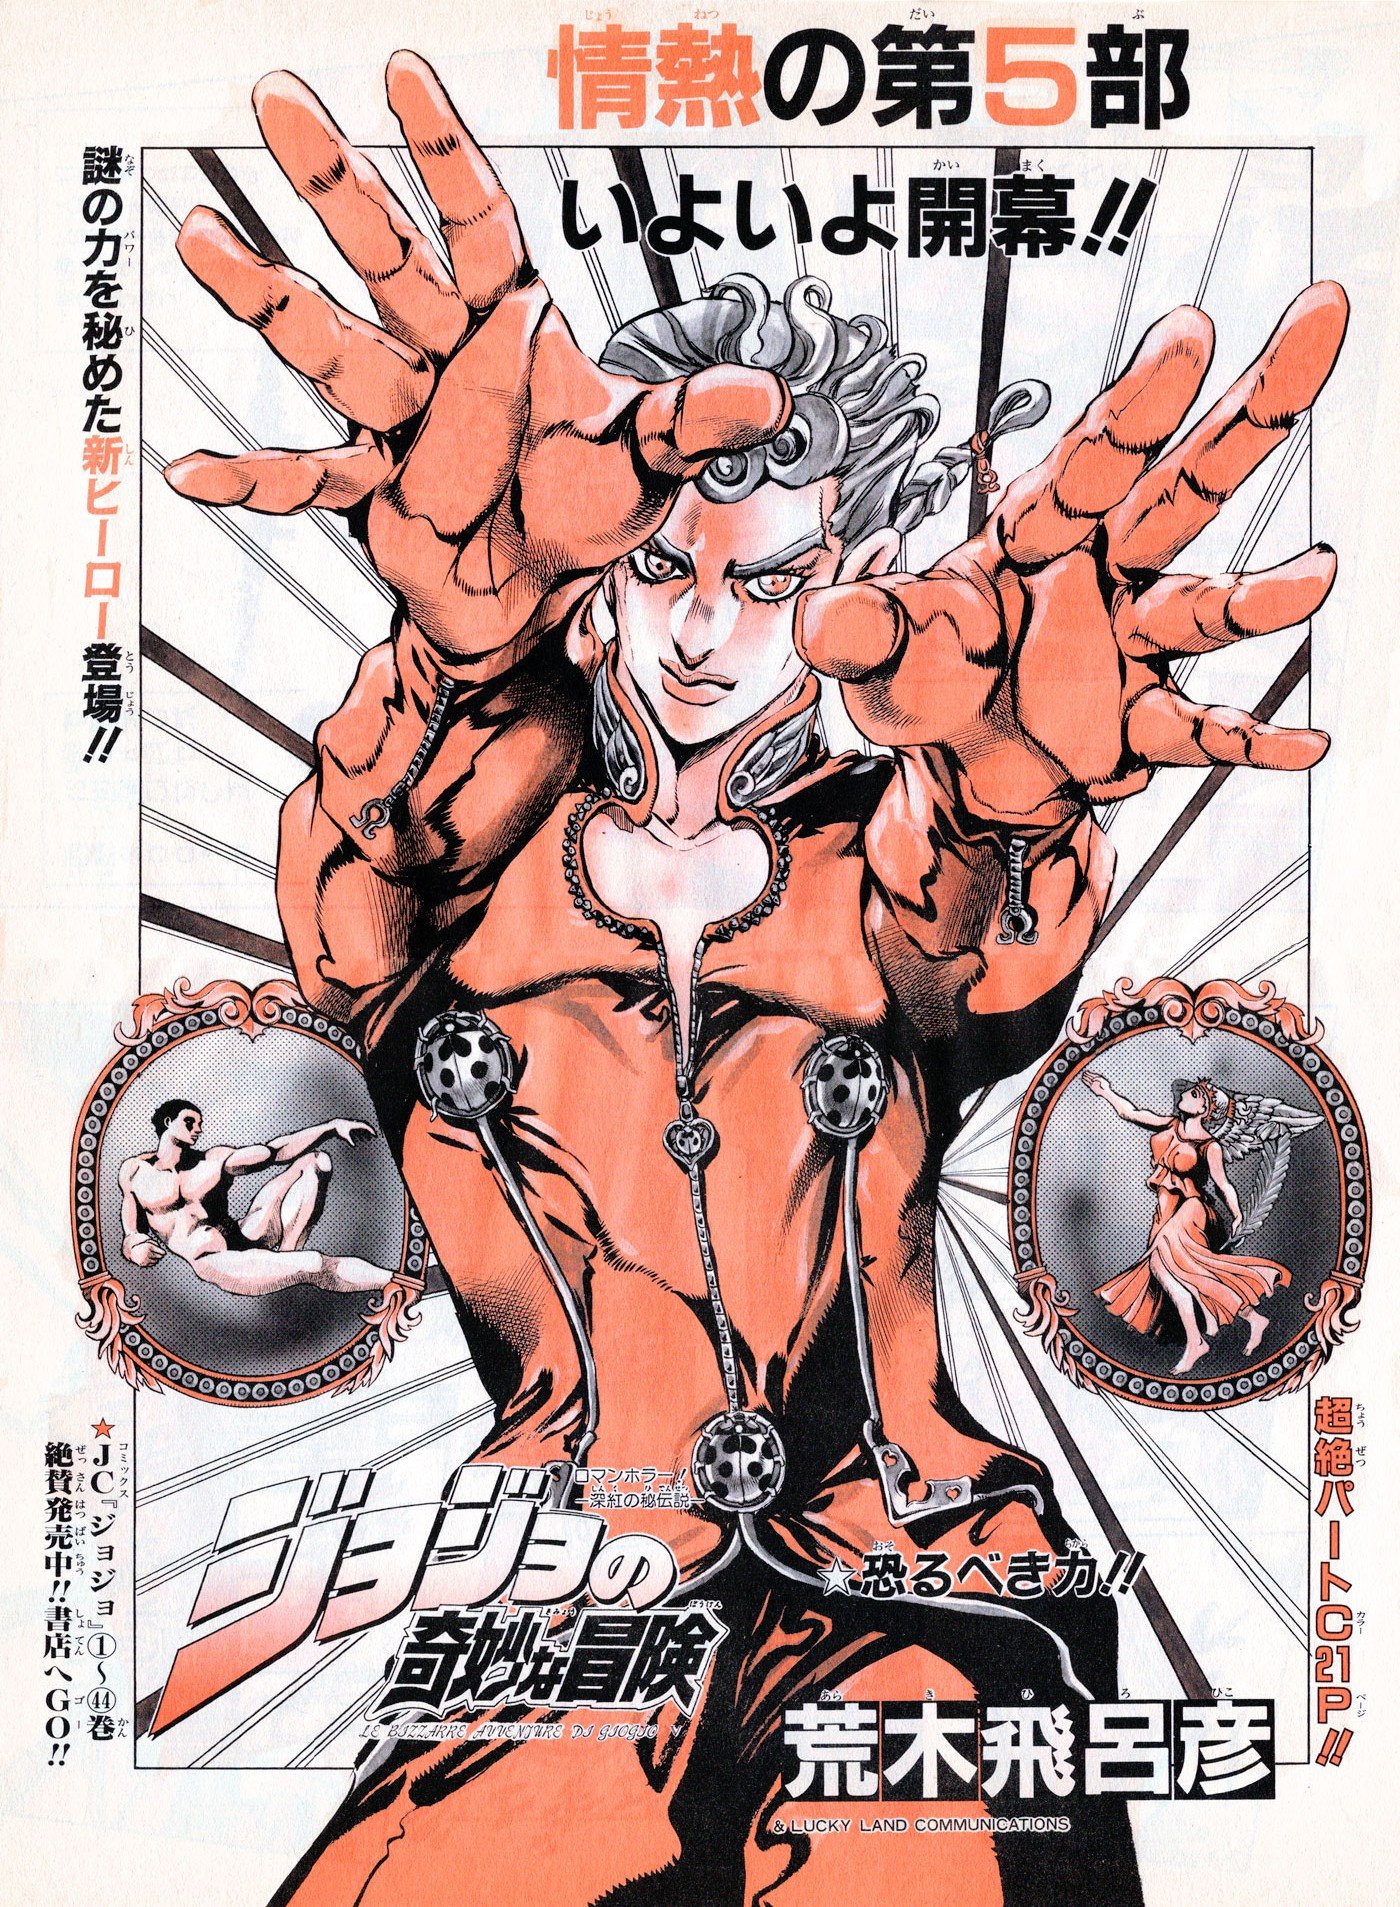 JJBA Reference Gallery on X: Arthur Elgort's Models Manual (1990) by  Arthur Elgort ft. Susan Holmes, Vento Aureo ch. 1 Cover (1995)